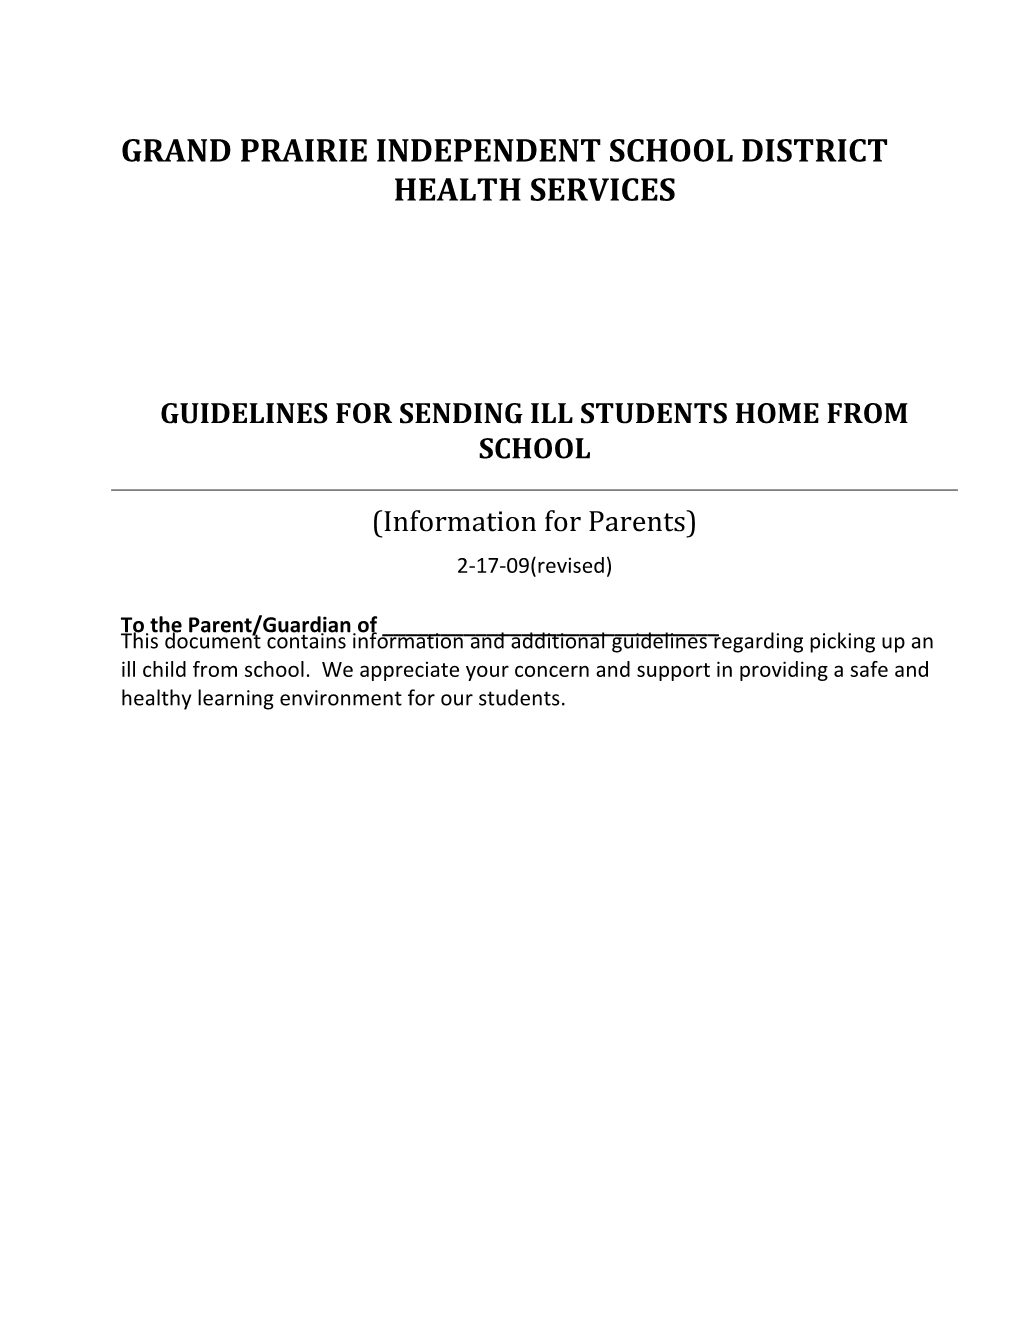 Guidelines for Sending Ill Students Home from School